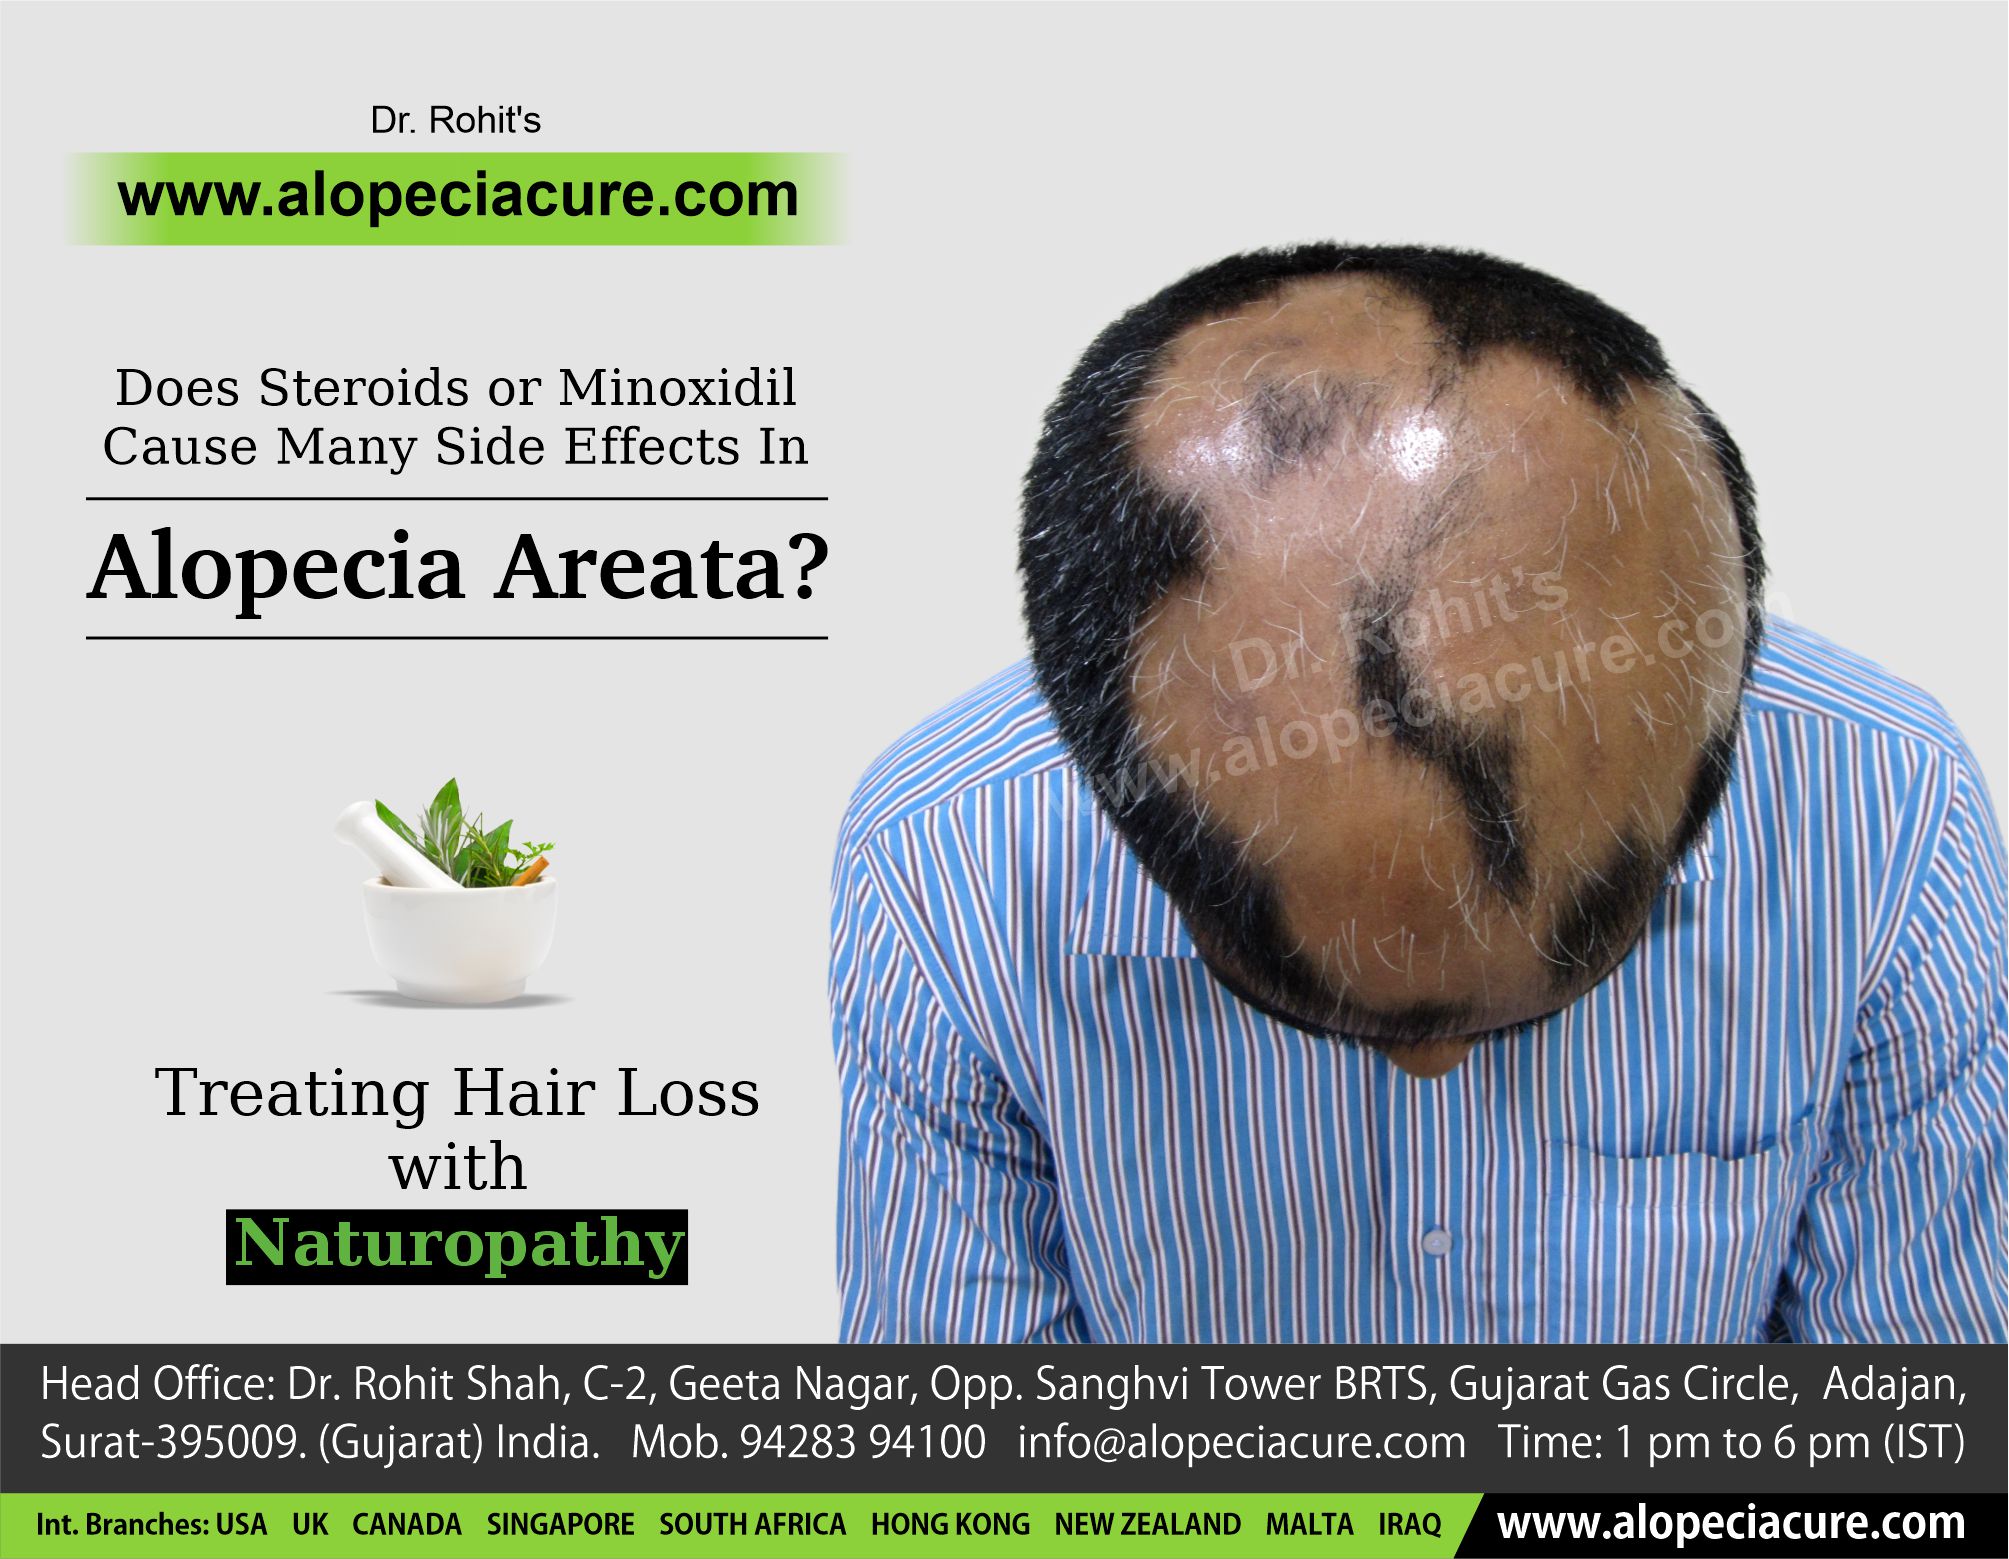 Does Steroids Or Minoxidil Cause Many Side Effects In Alopecia Areata?